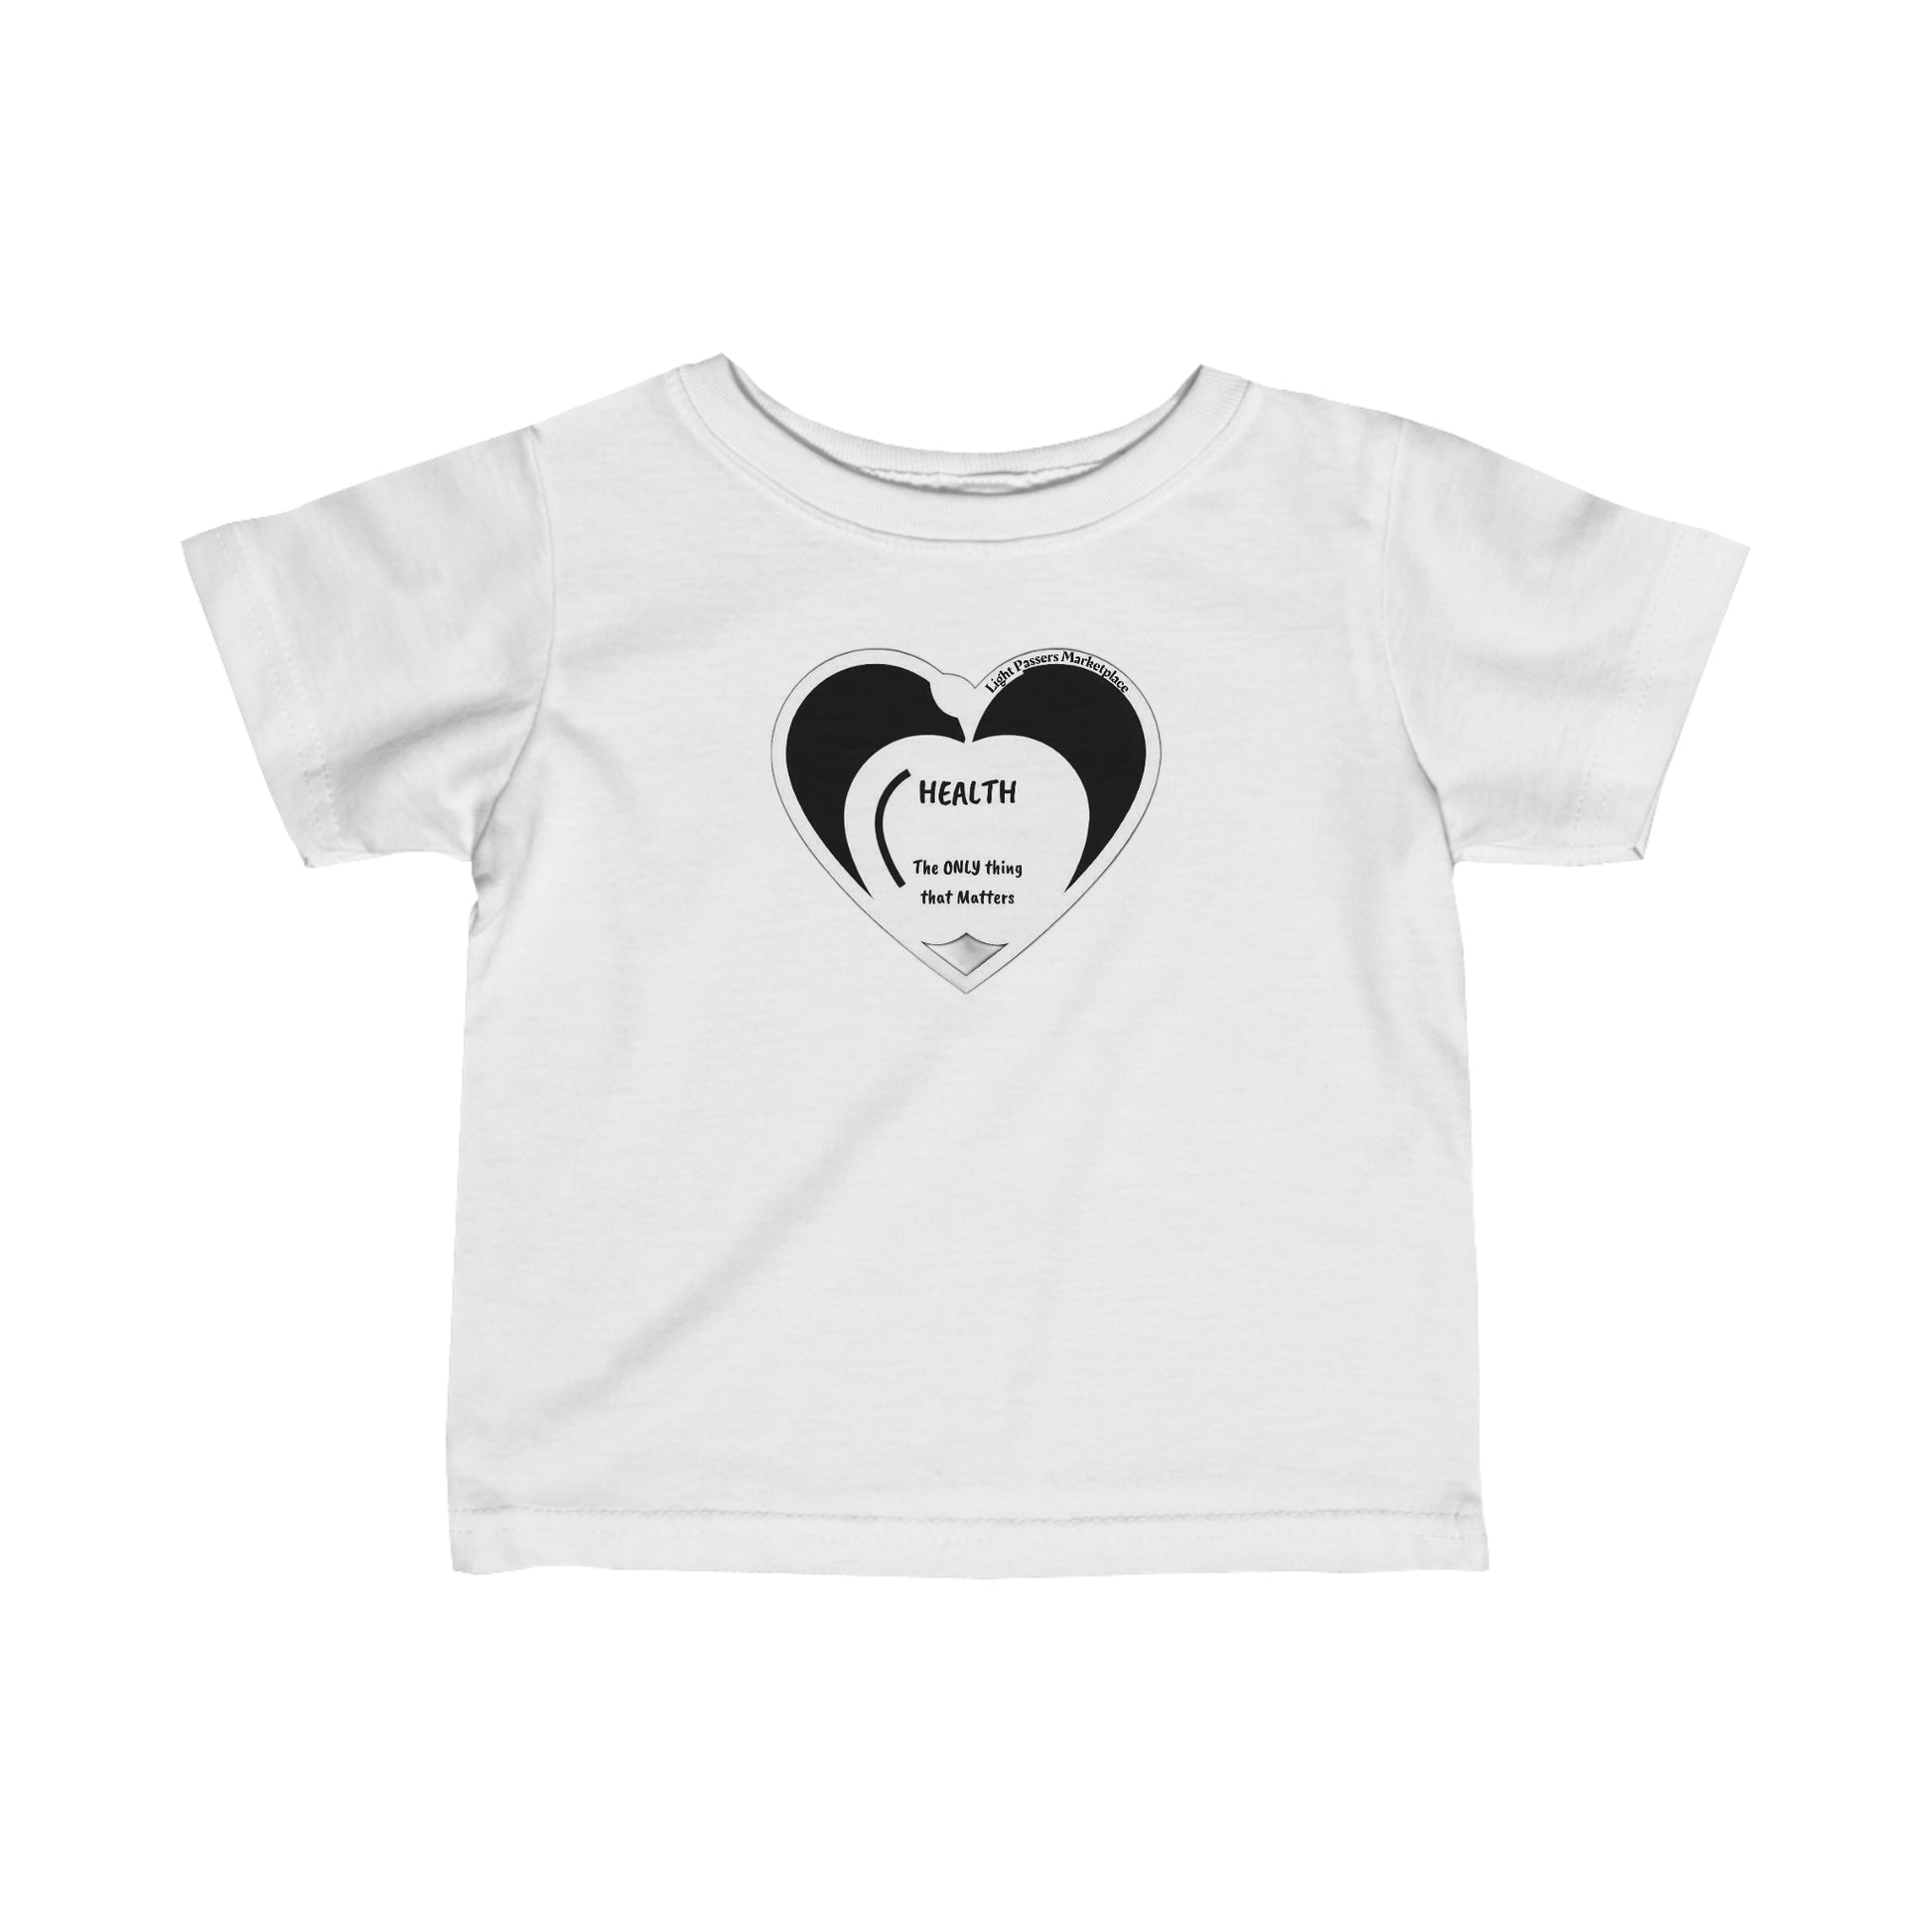 Infant fine jersey tee with heart graphic and text, featuring side seams for shape support, ribbed knitting for durability, and taped shoulders for a comfortable fit.